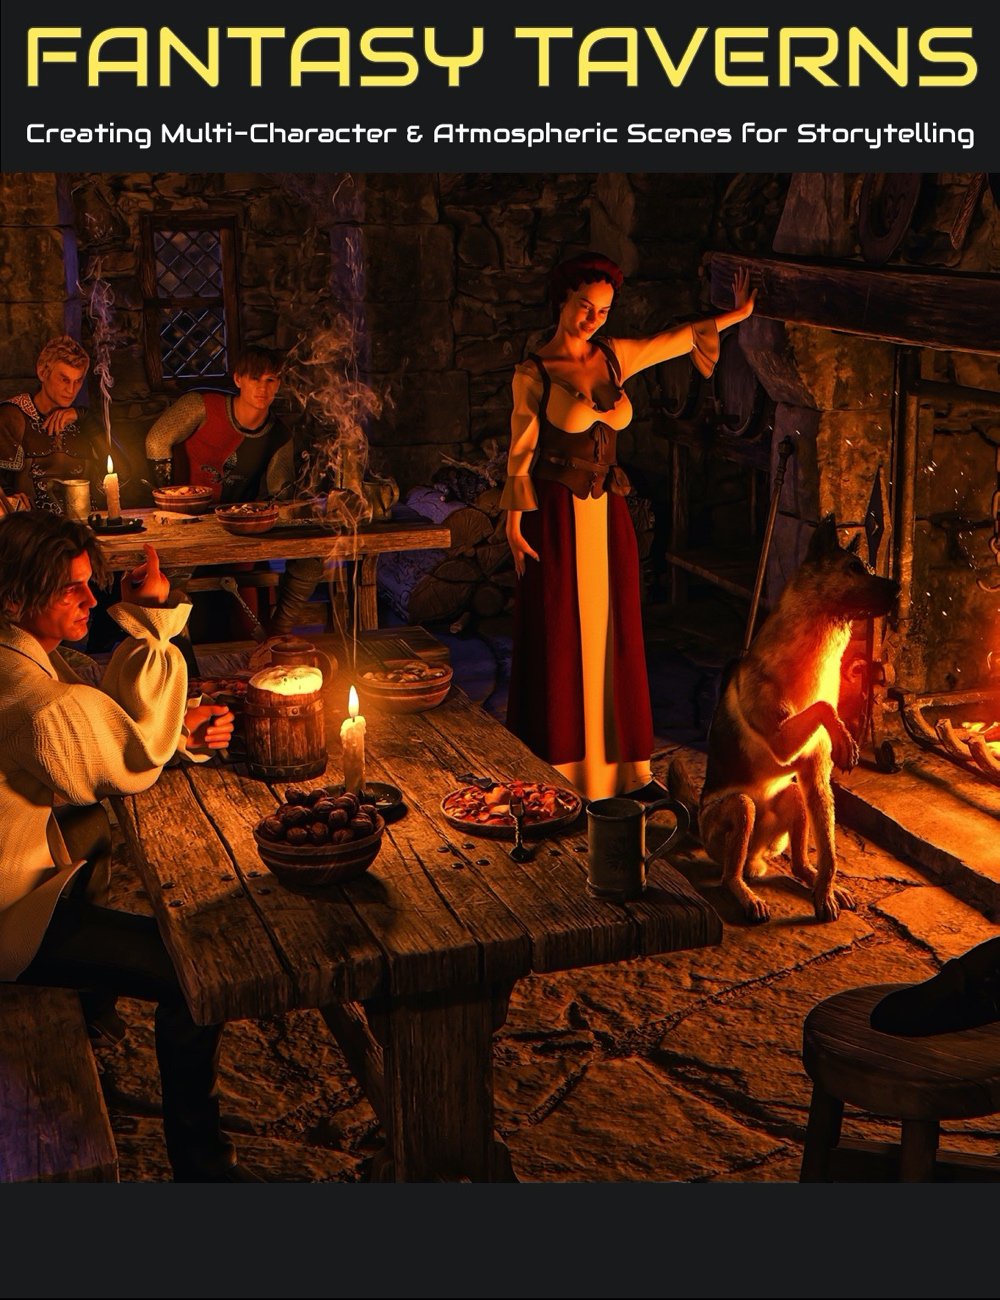 Fantasy Taverns: A Workshop on Multi-Character and Atmospheric Scenes